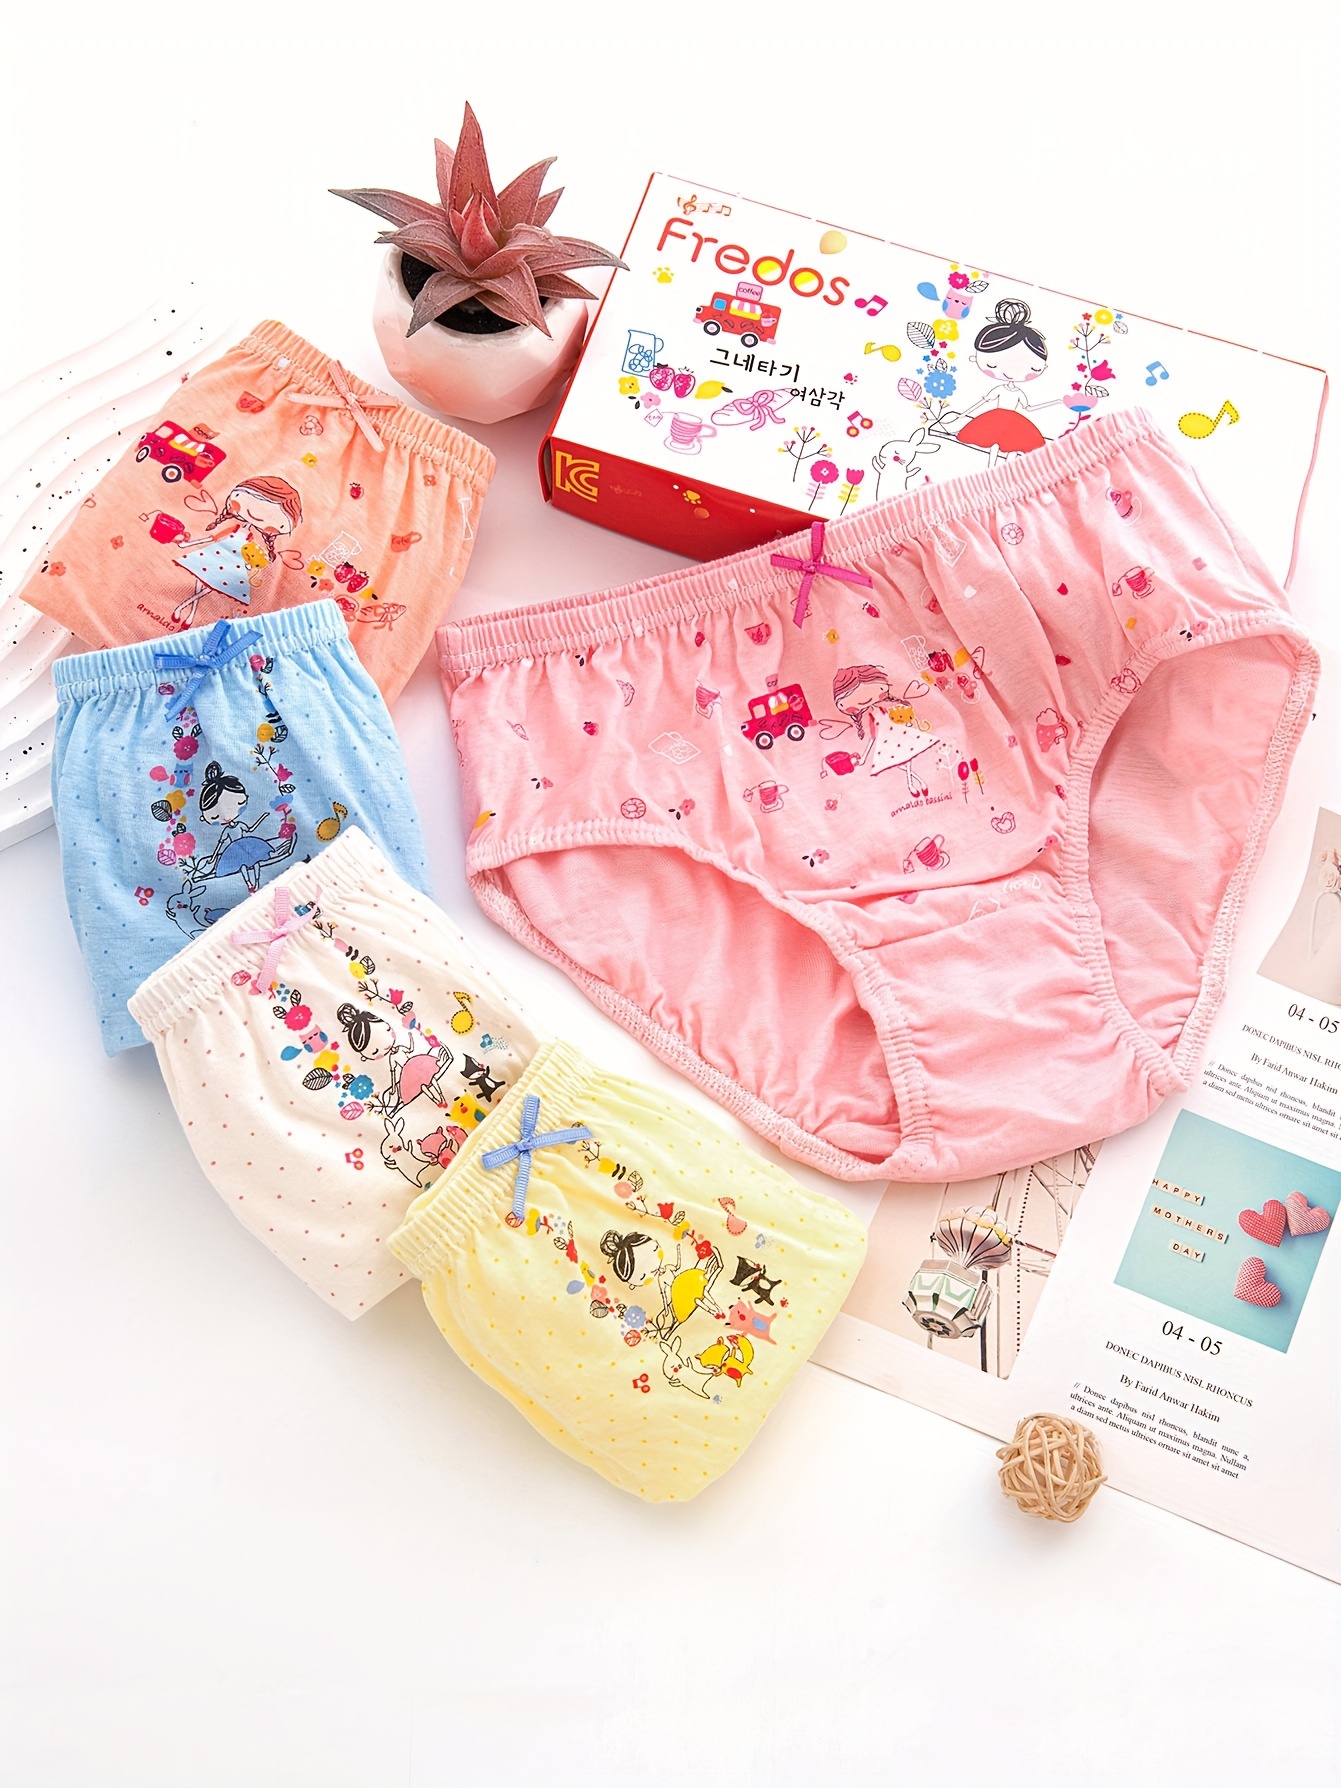 5 Pcs/Lot Cotton Girl Underwear Pretty Cartoon Panties For Girls 1-14Y  Breathable Kids Boxers Briefs Elastic Children Underpants Color: 2-20GS030,  Kid Size: S (4-5 Years)